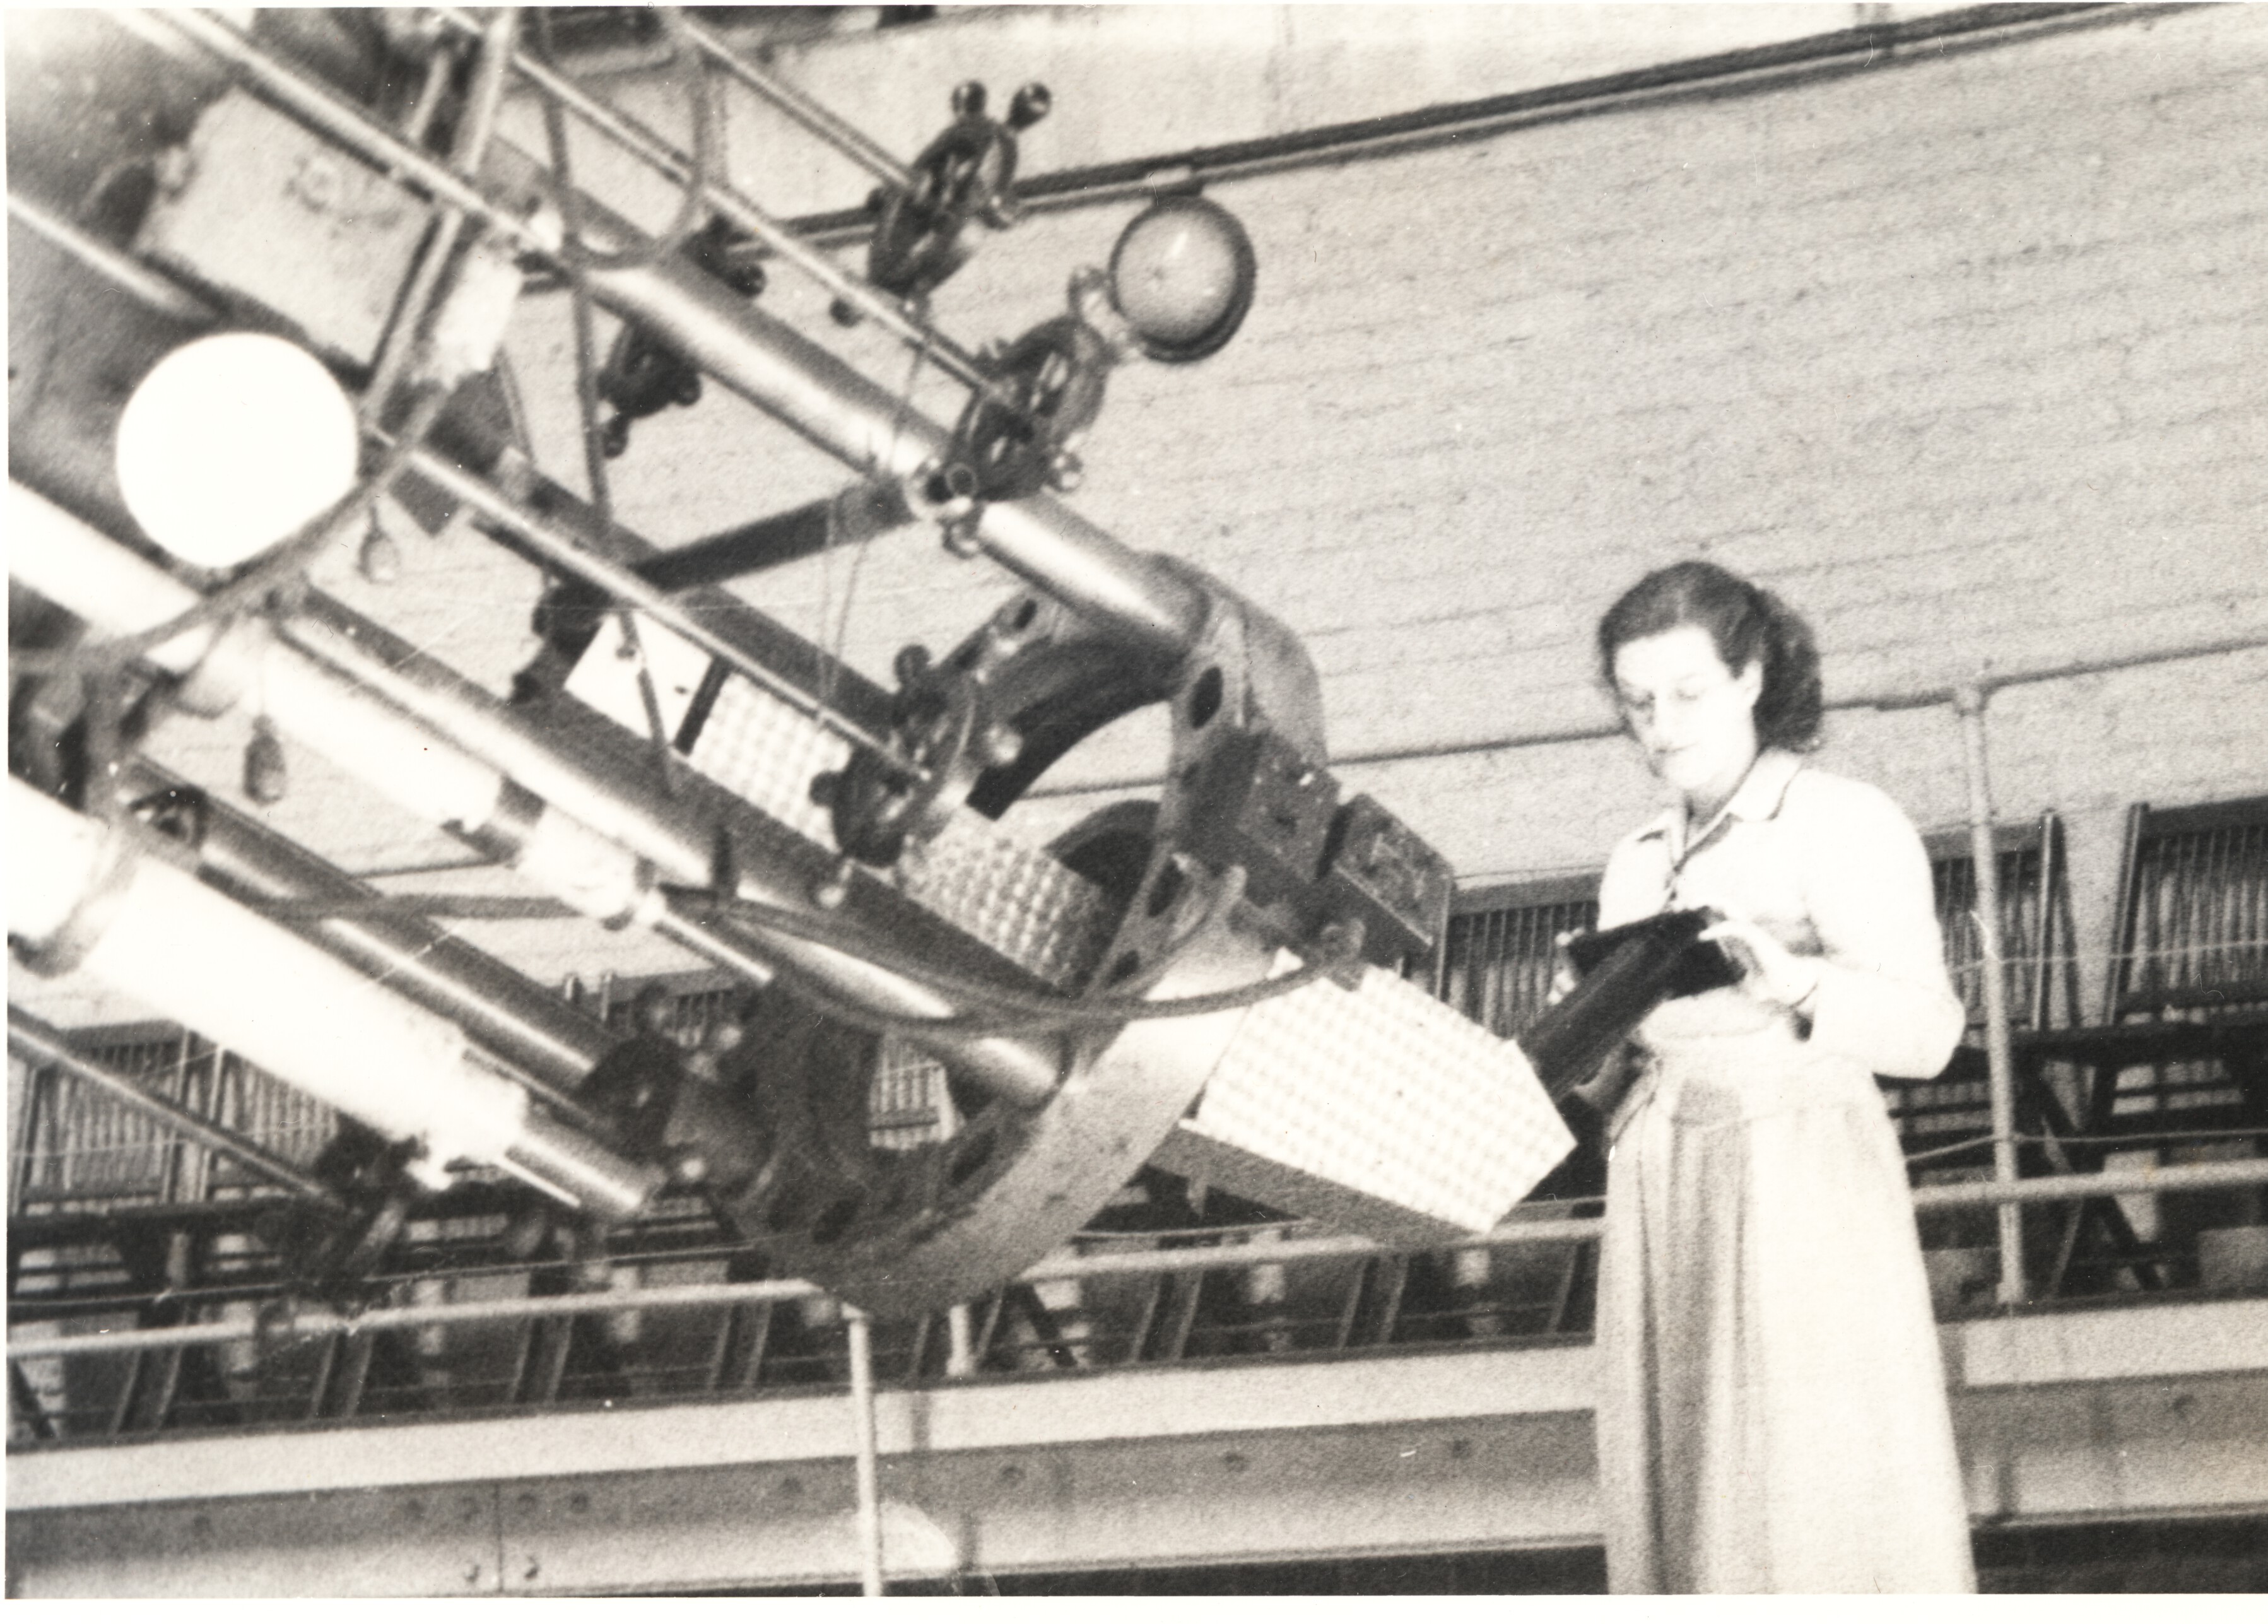 A woman stands at the end of a very large telescope in 1948